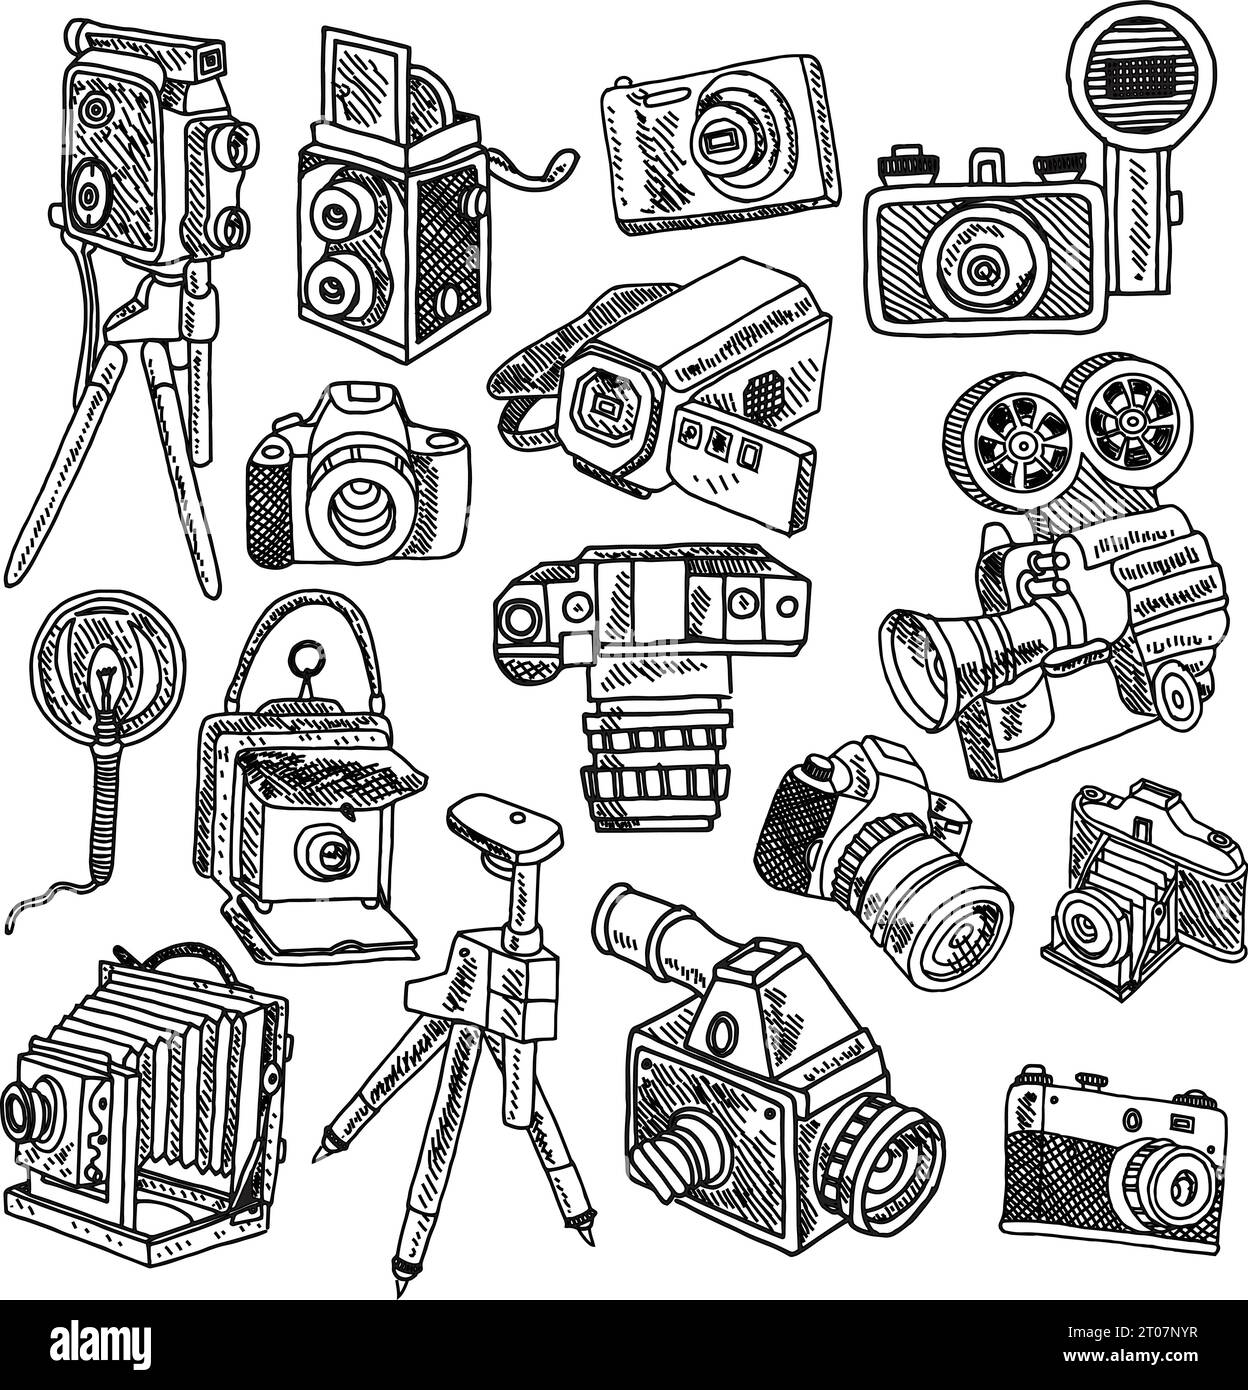 Photo and movie vintage hobby cameras with tripod and flashlight pictograms collection graphic doodle sketch vector illustration Stock Vector